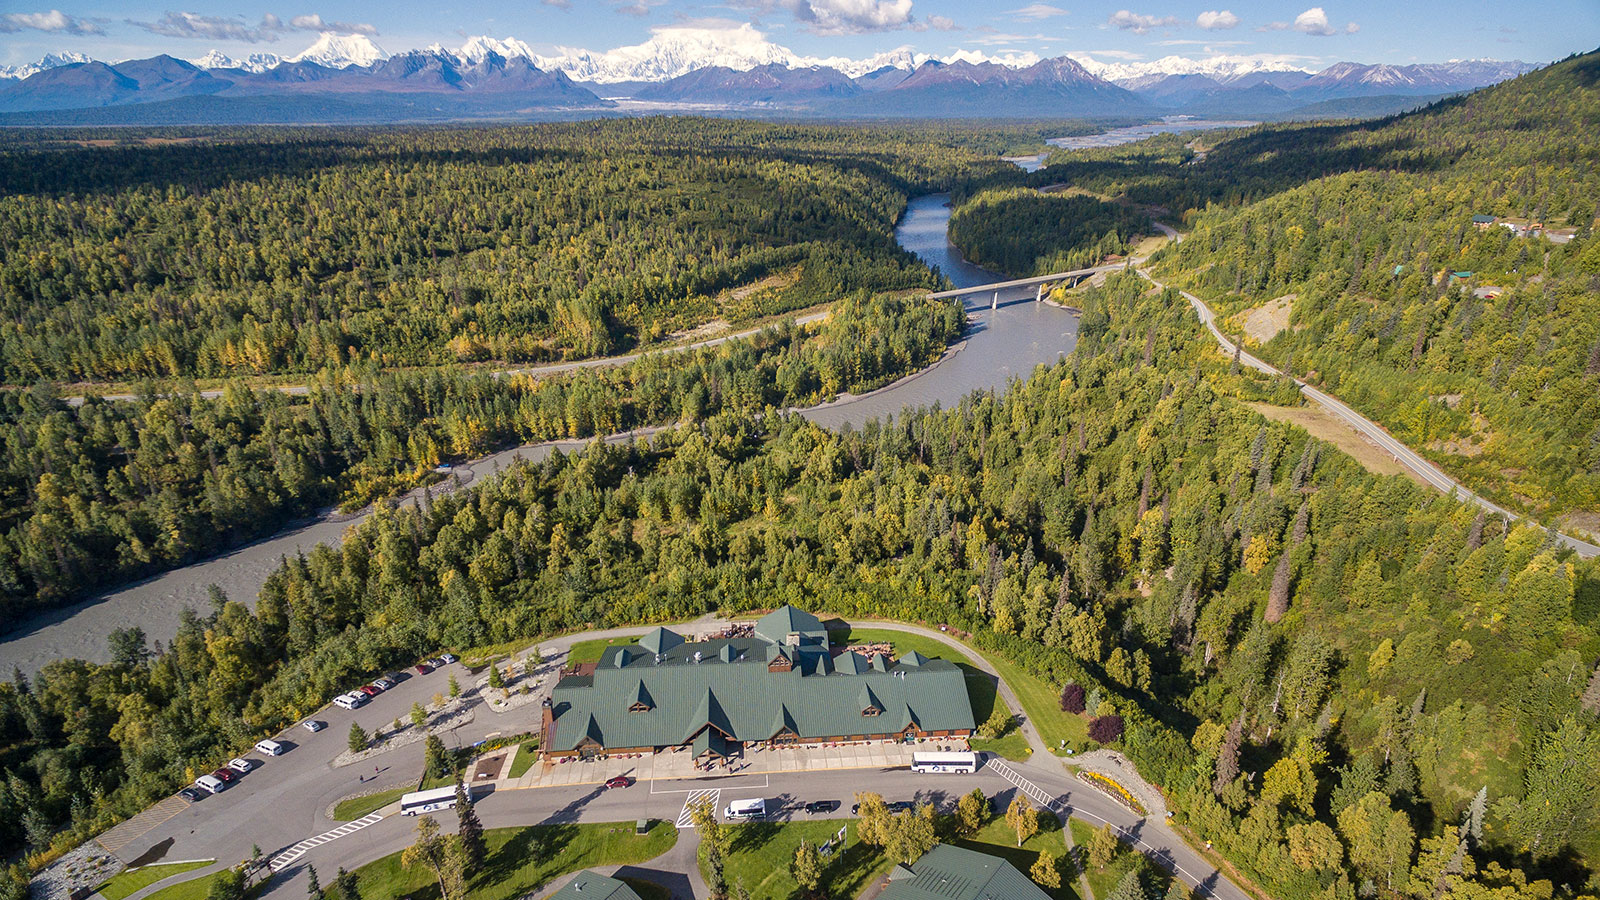 Mt. Mckinley Princess Wilderness Lodge and its natural surroundings